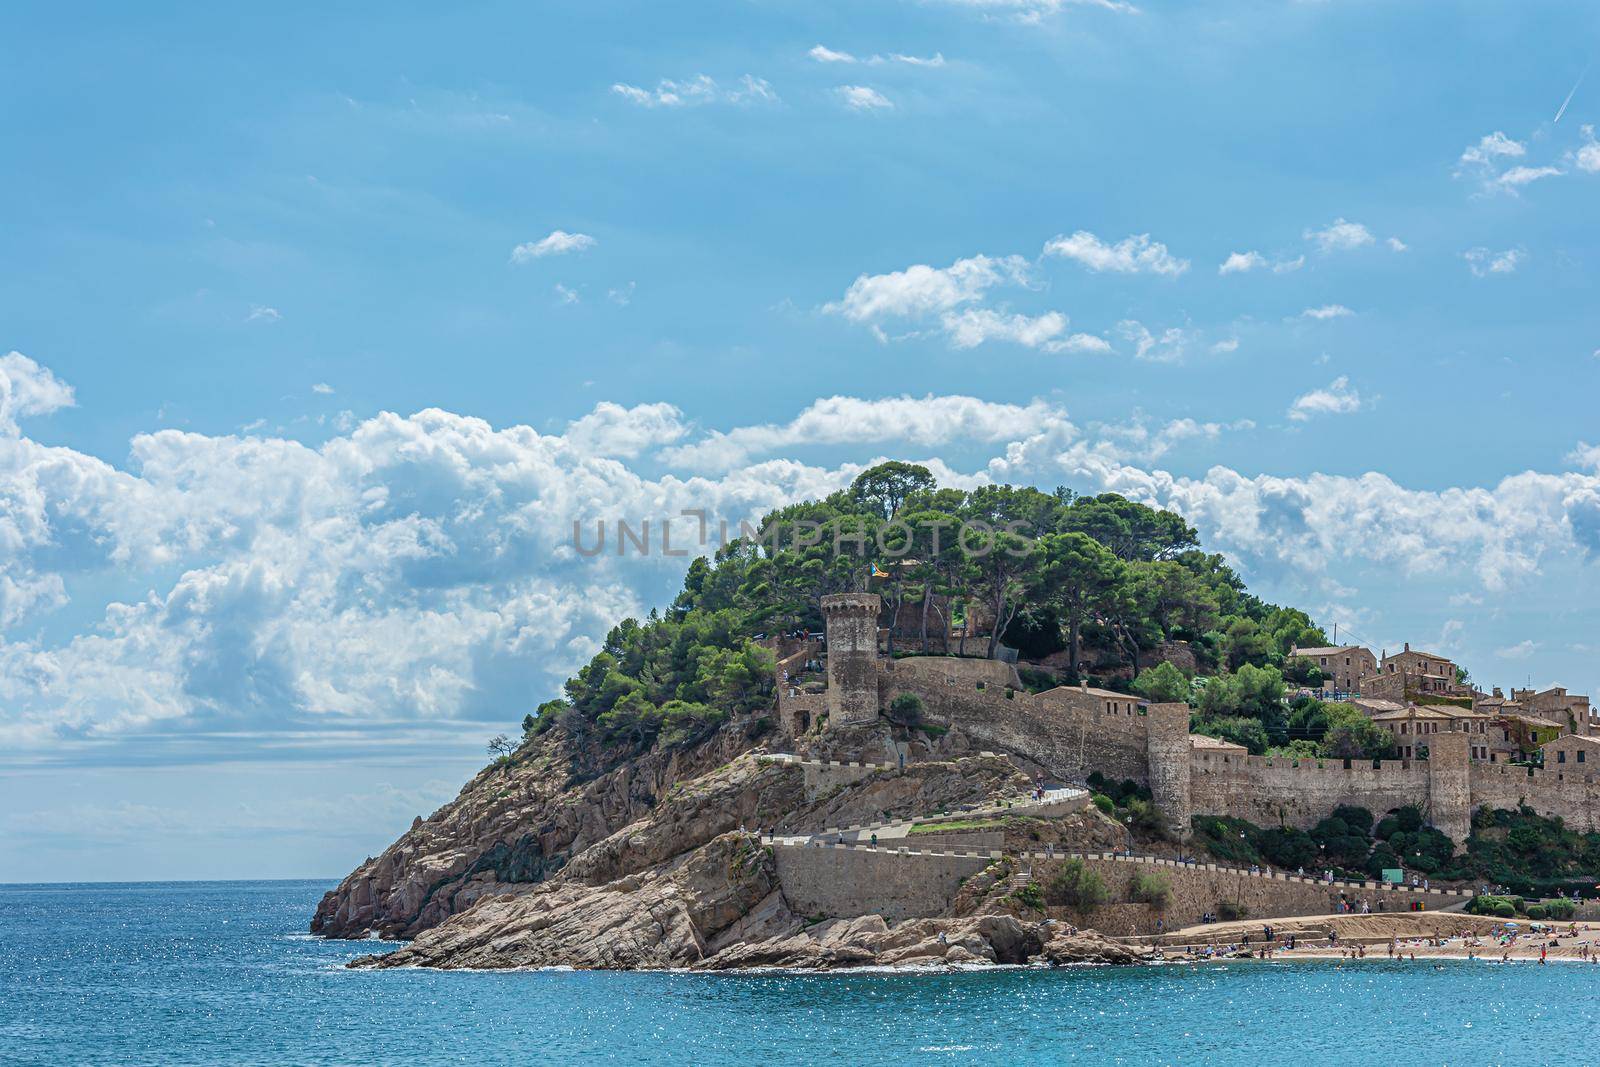 Tossa, Spain - 09/19/2017: the Old castle and fortress on the sea shore. Stock photo.